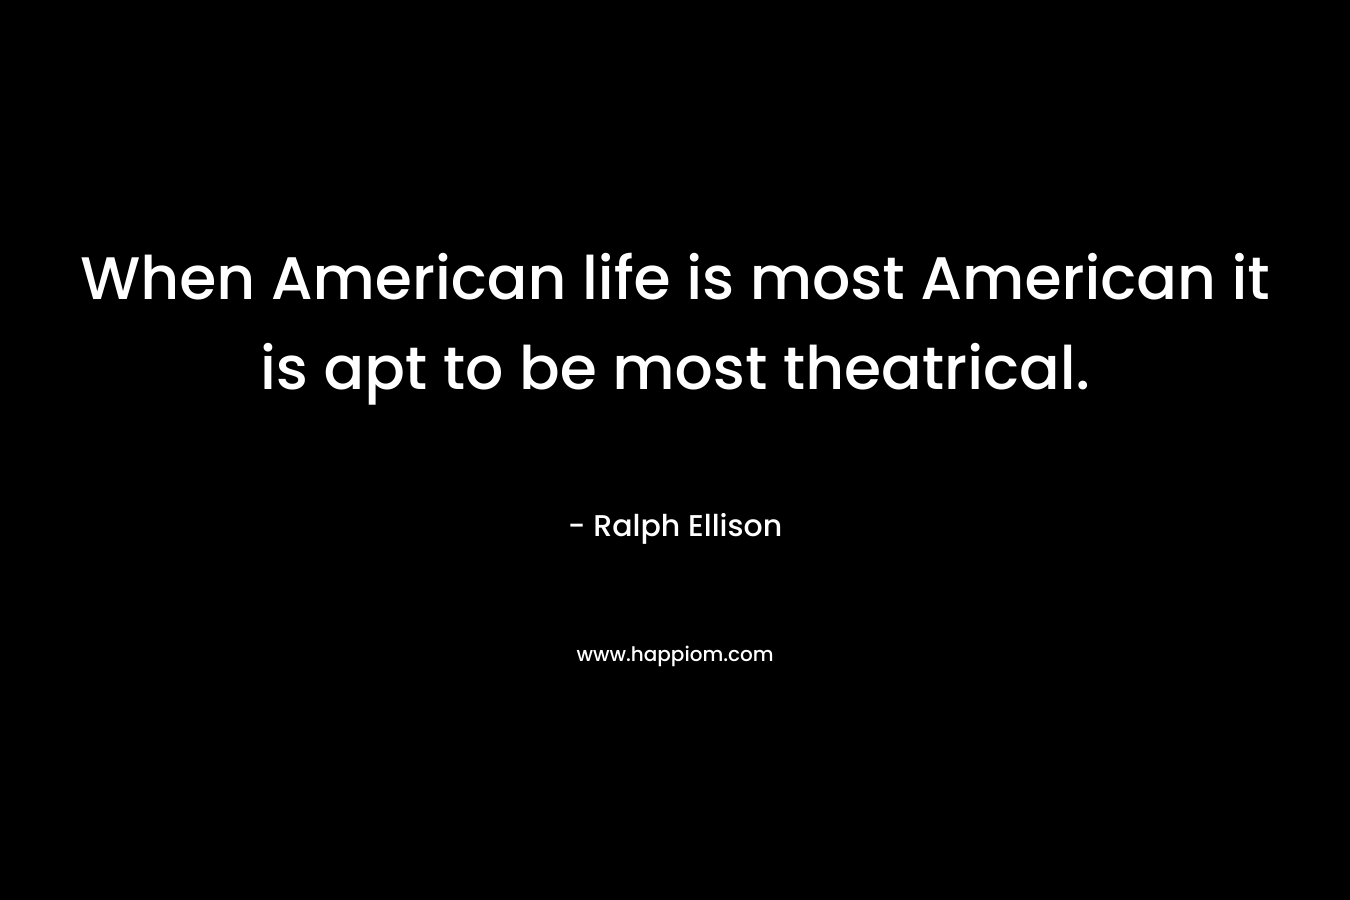 When American life is most American it is apt to be most theatrical. – Ralph Ellison